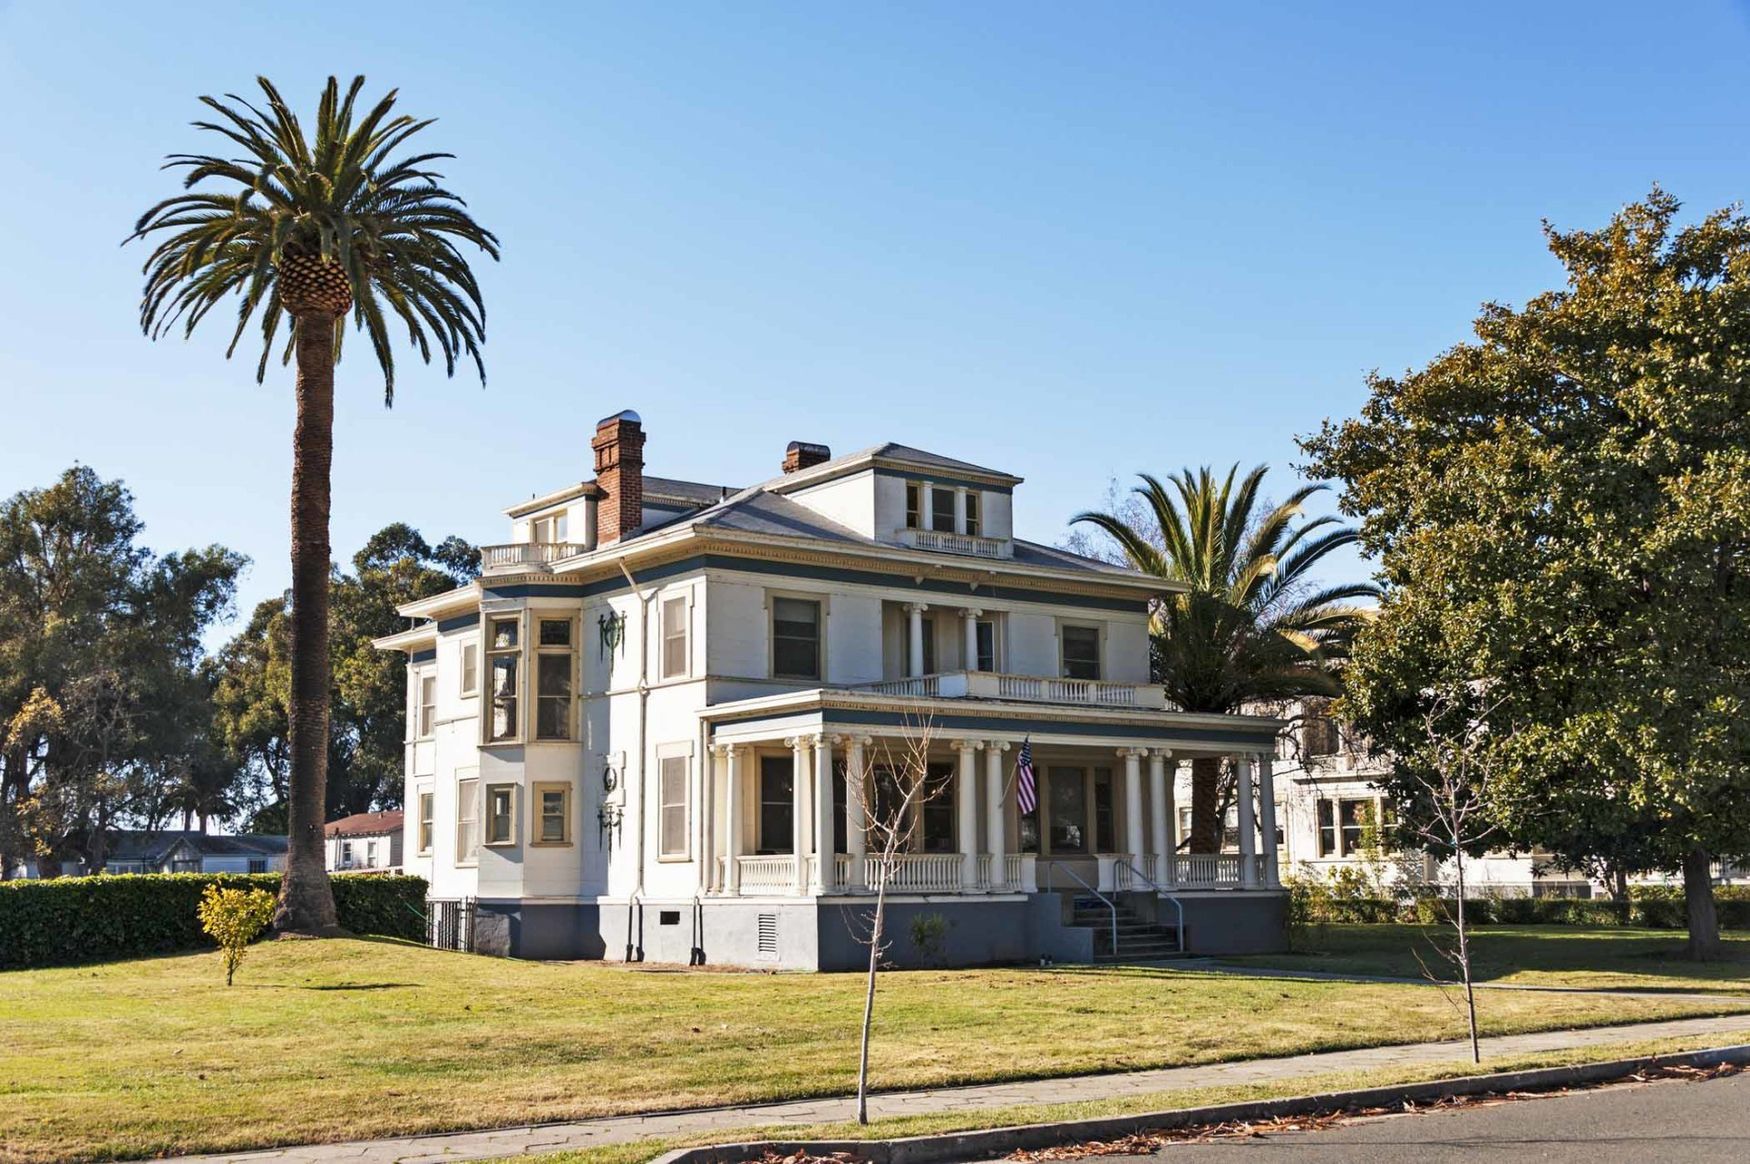 This beautiful Military Officer housing is located on Mare Island at Vallejo California.